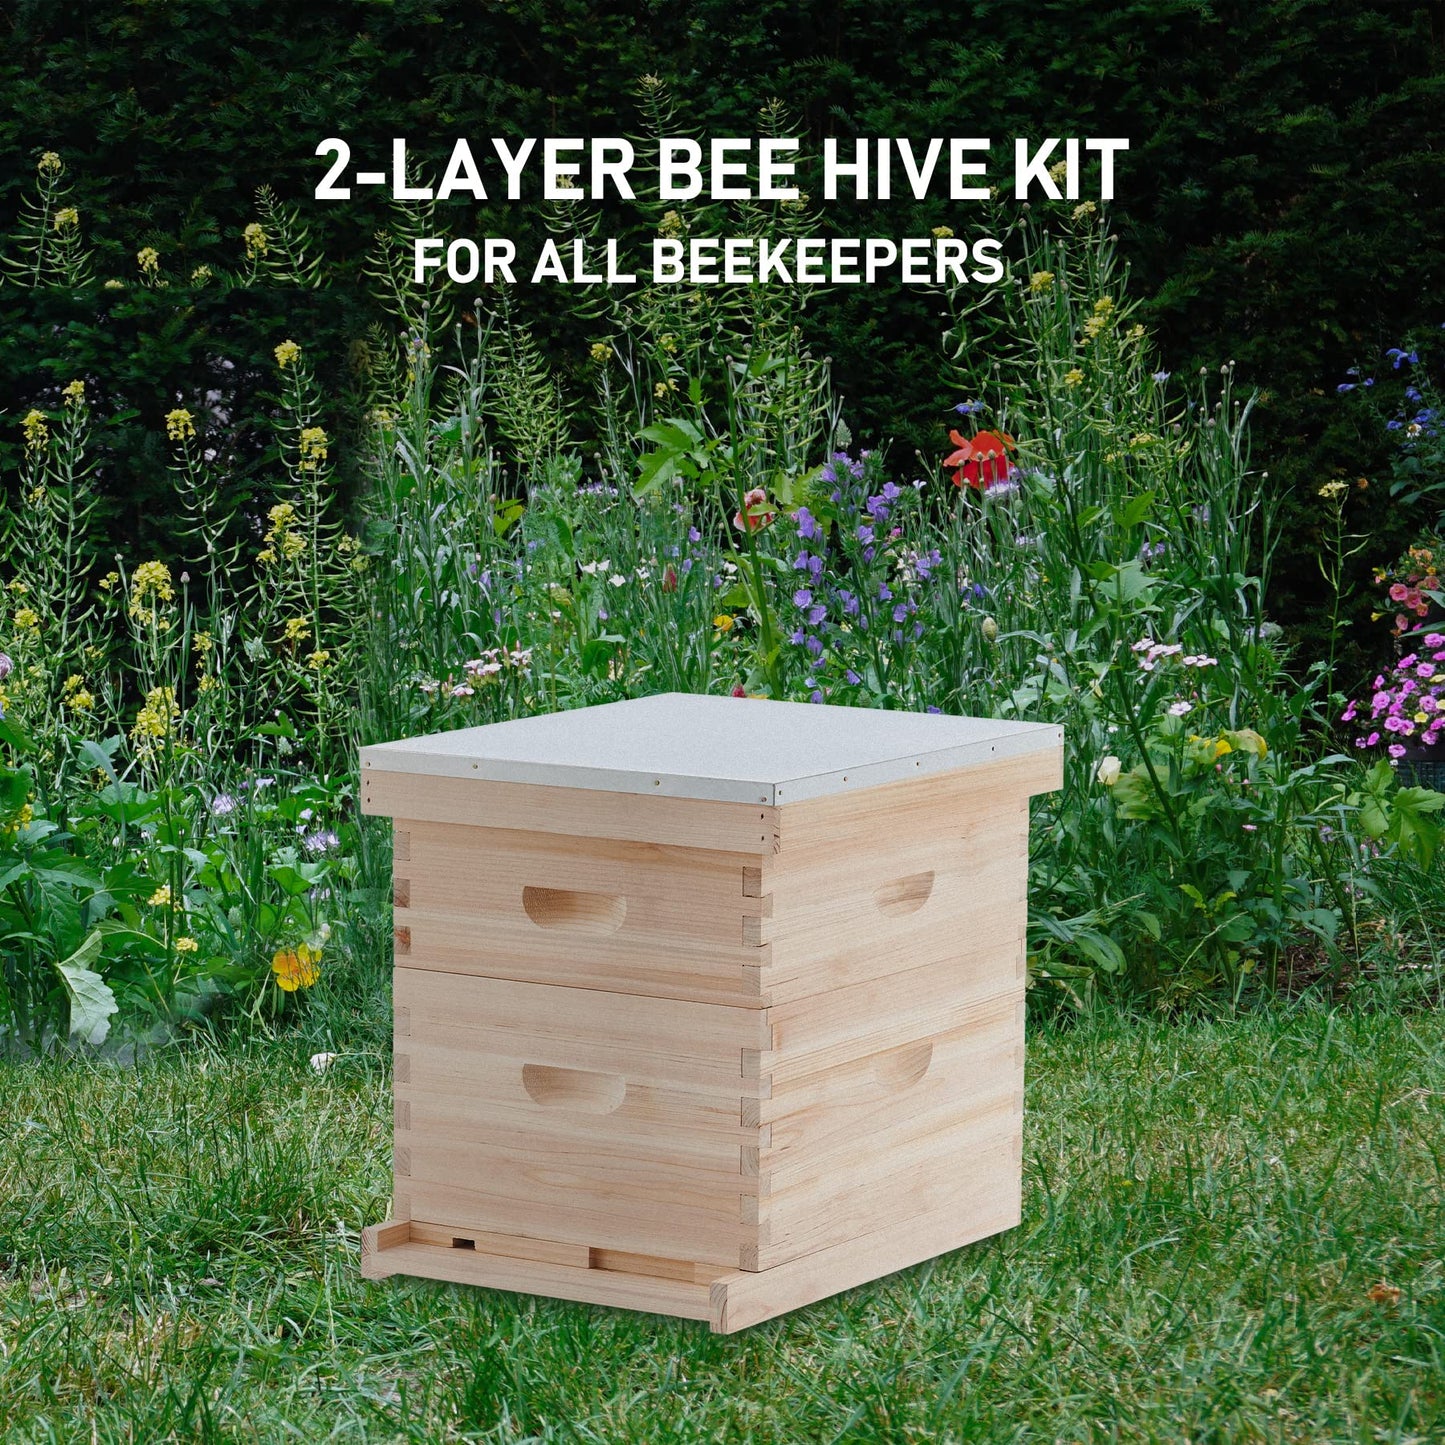 CREWORKS Bee Hive Boxes 10 Frame Langstroth Beehive, Bee Keeping Starter Kit Includes 1 Super Bee Box & 1 Bee Brood Box with Beehive Frames and Foundation, 2 Layers Complete Bee Hive Kit